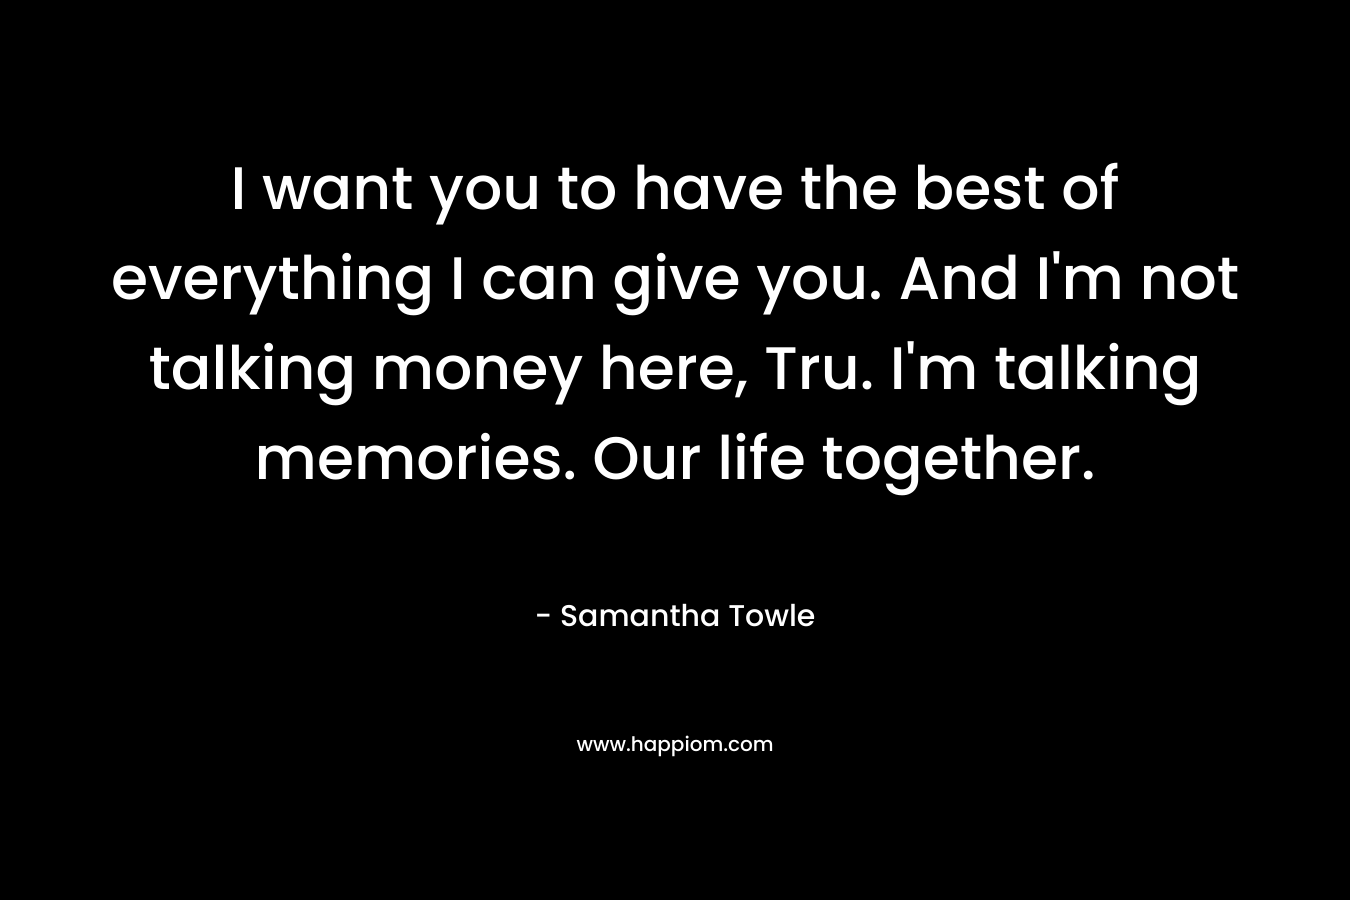 I want you to have the best of everything I can give you. And I’m not talking money here, Tru. I’m talking memories. Our life together. – Samantha Towle